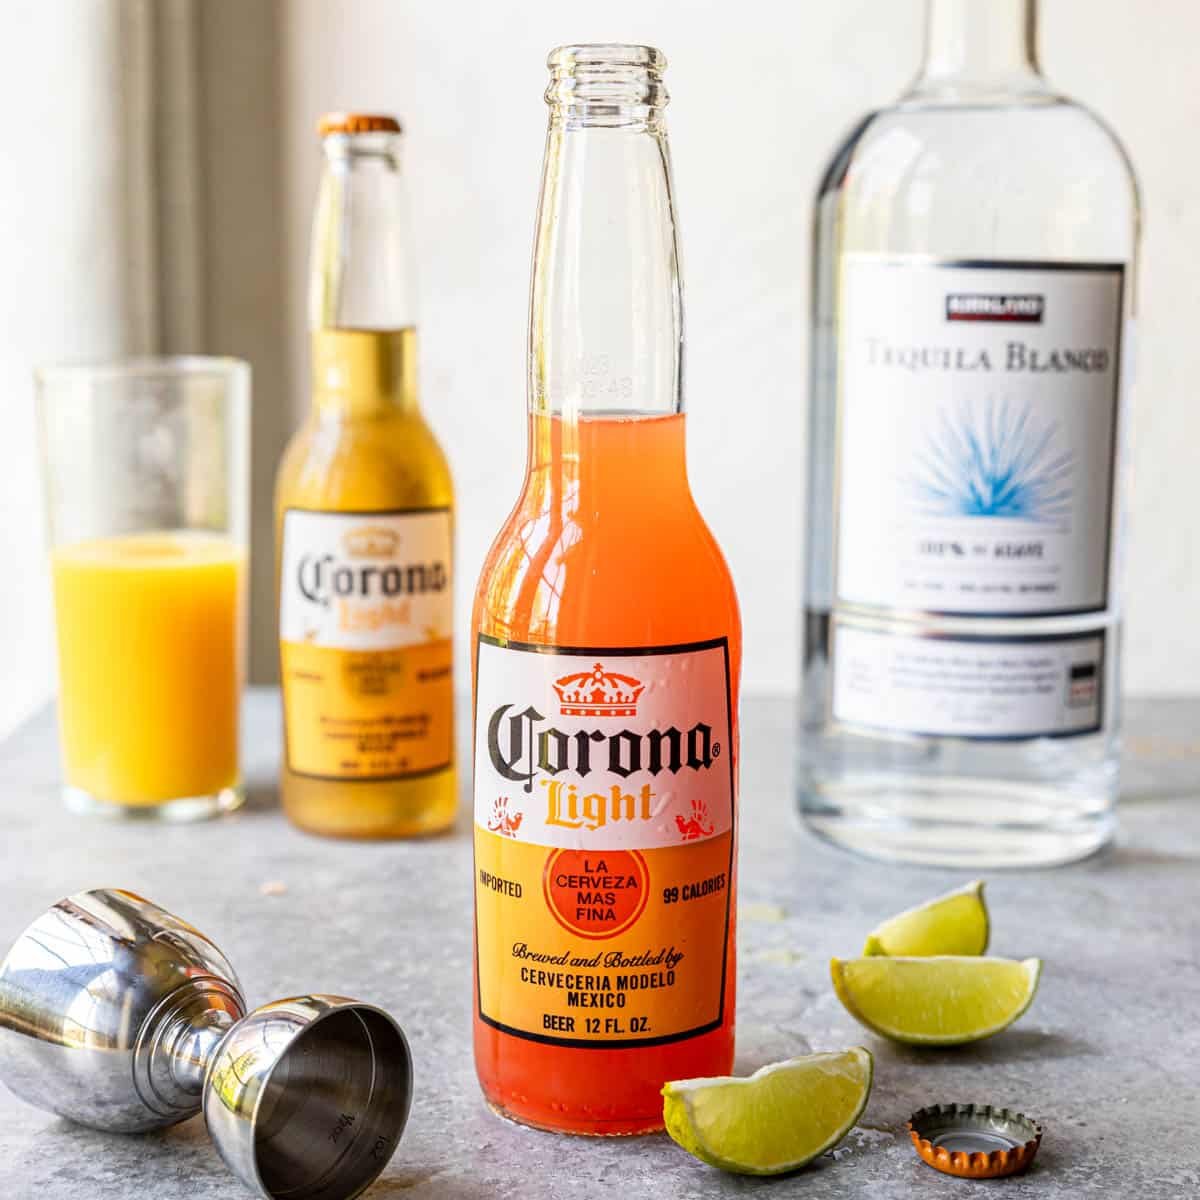 Corona Sunrise in a Corona Light bottle on a table with limes to the side